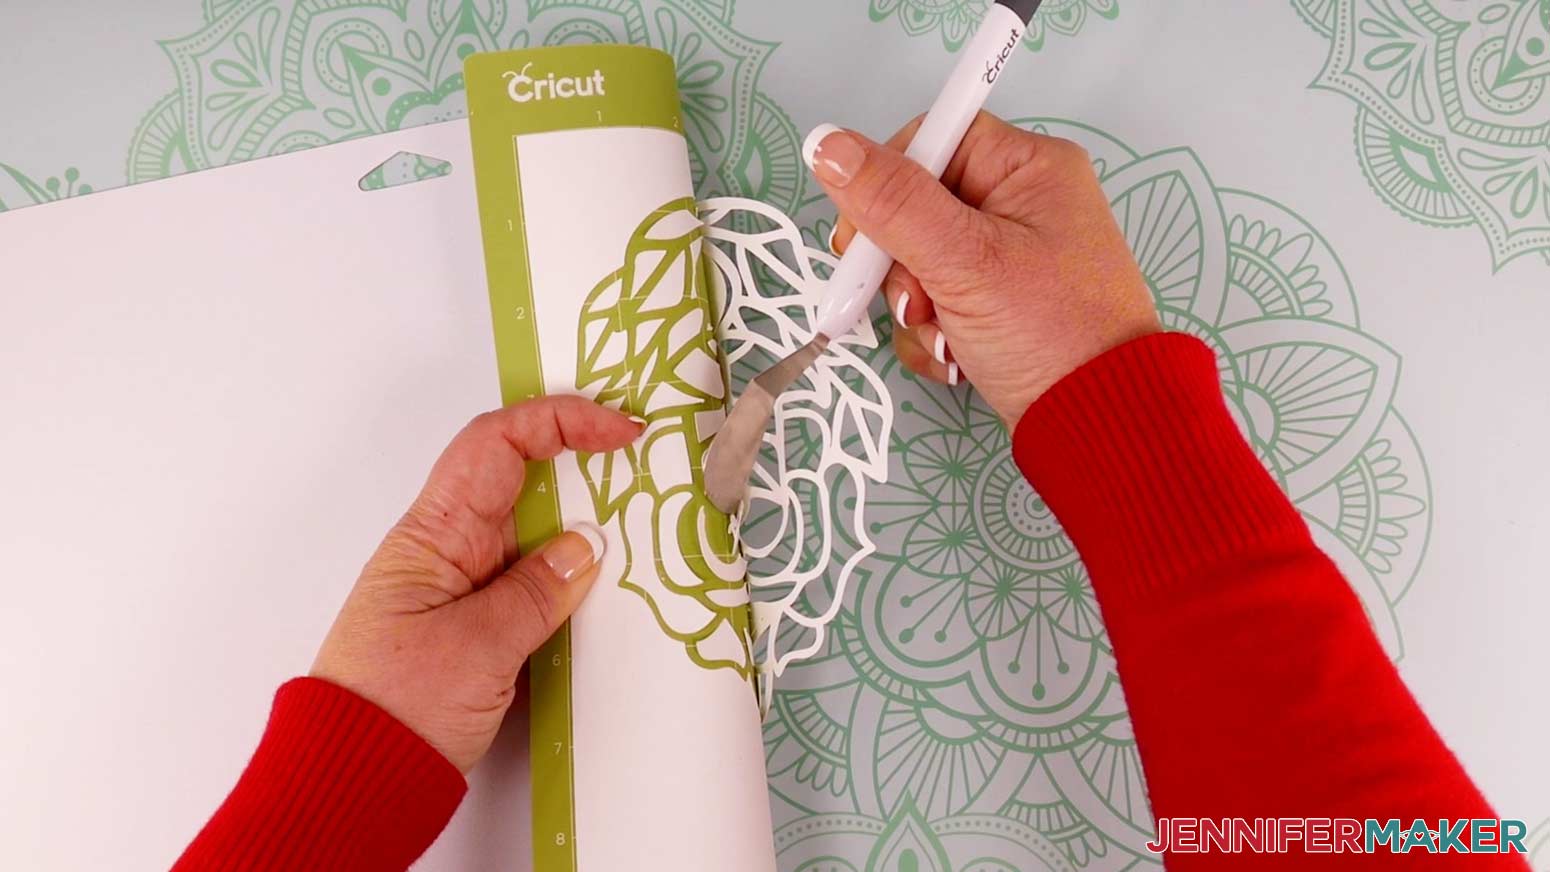 Use a spatula to carefully remove the intricate cut pieces from the cutting mat.